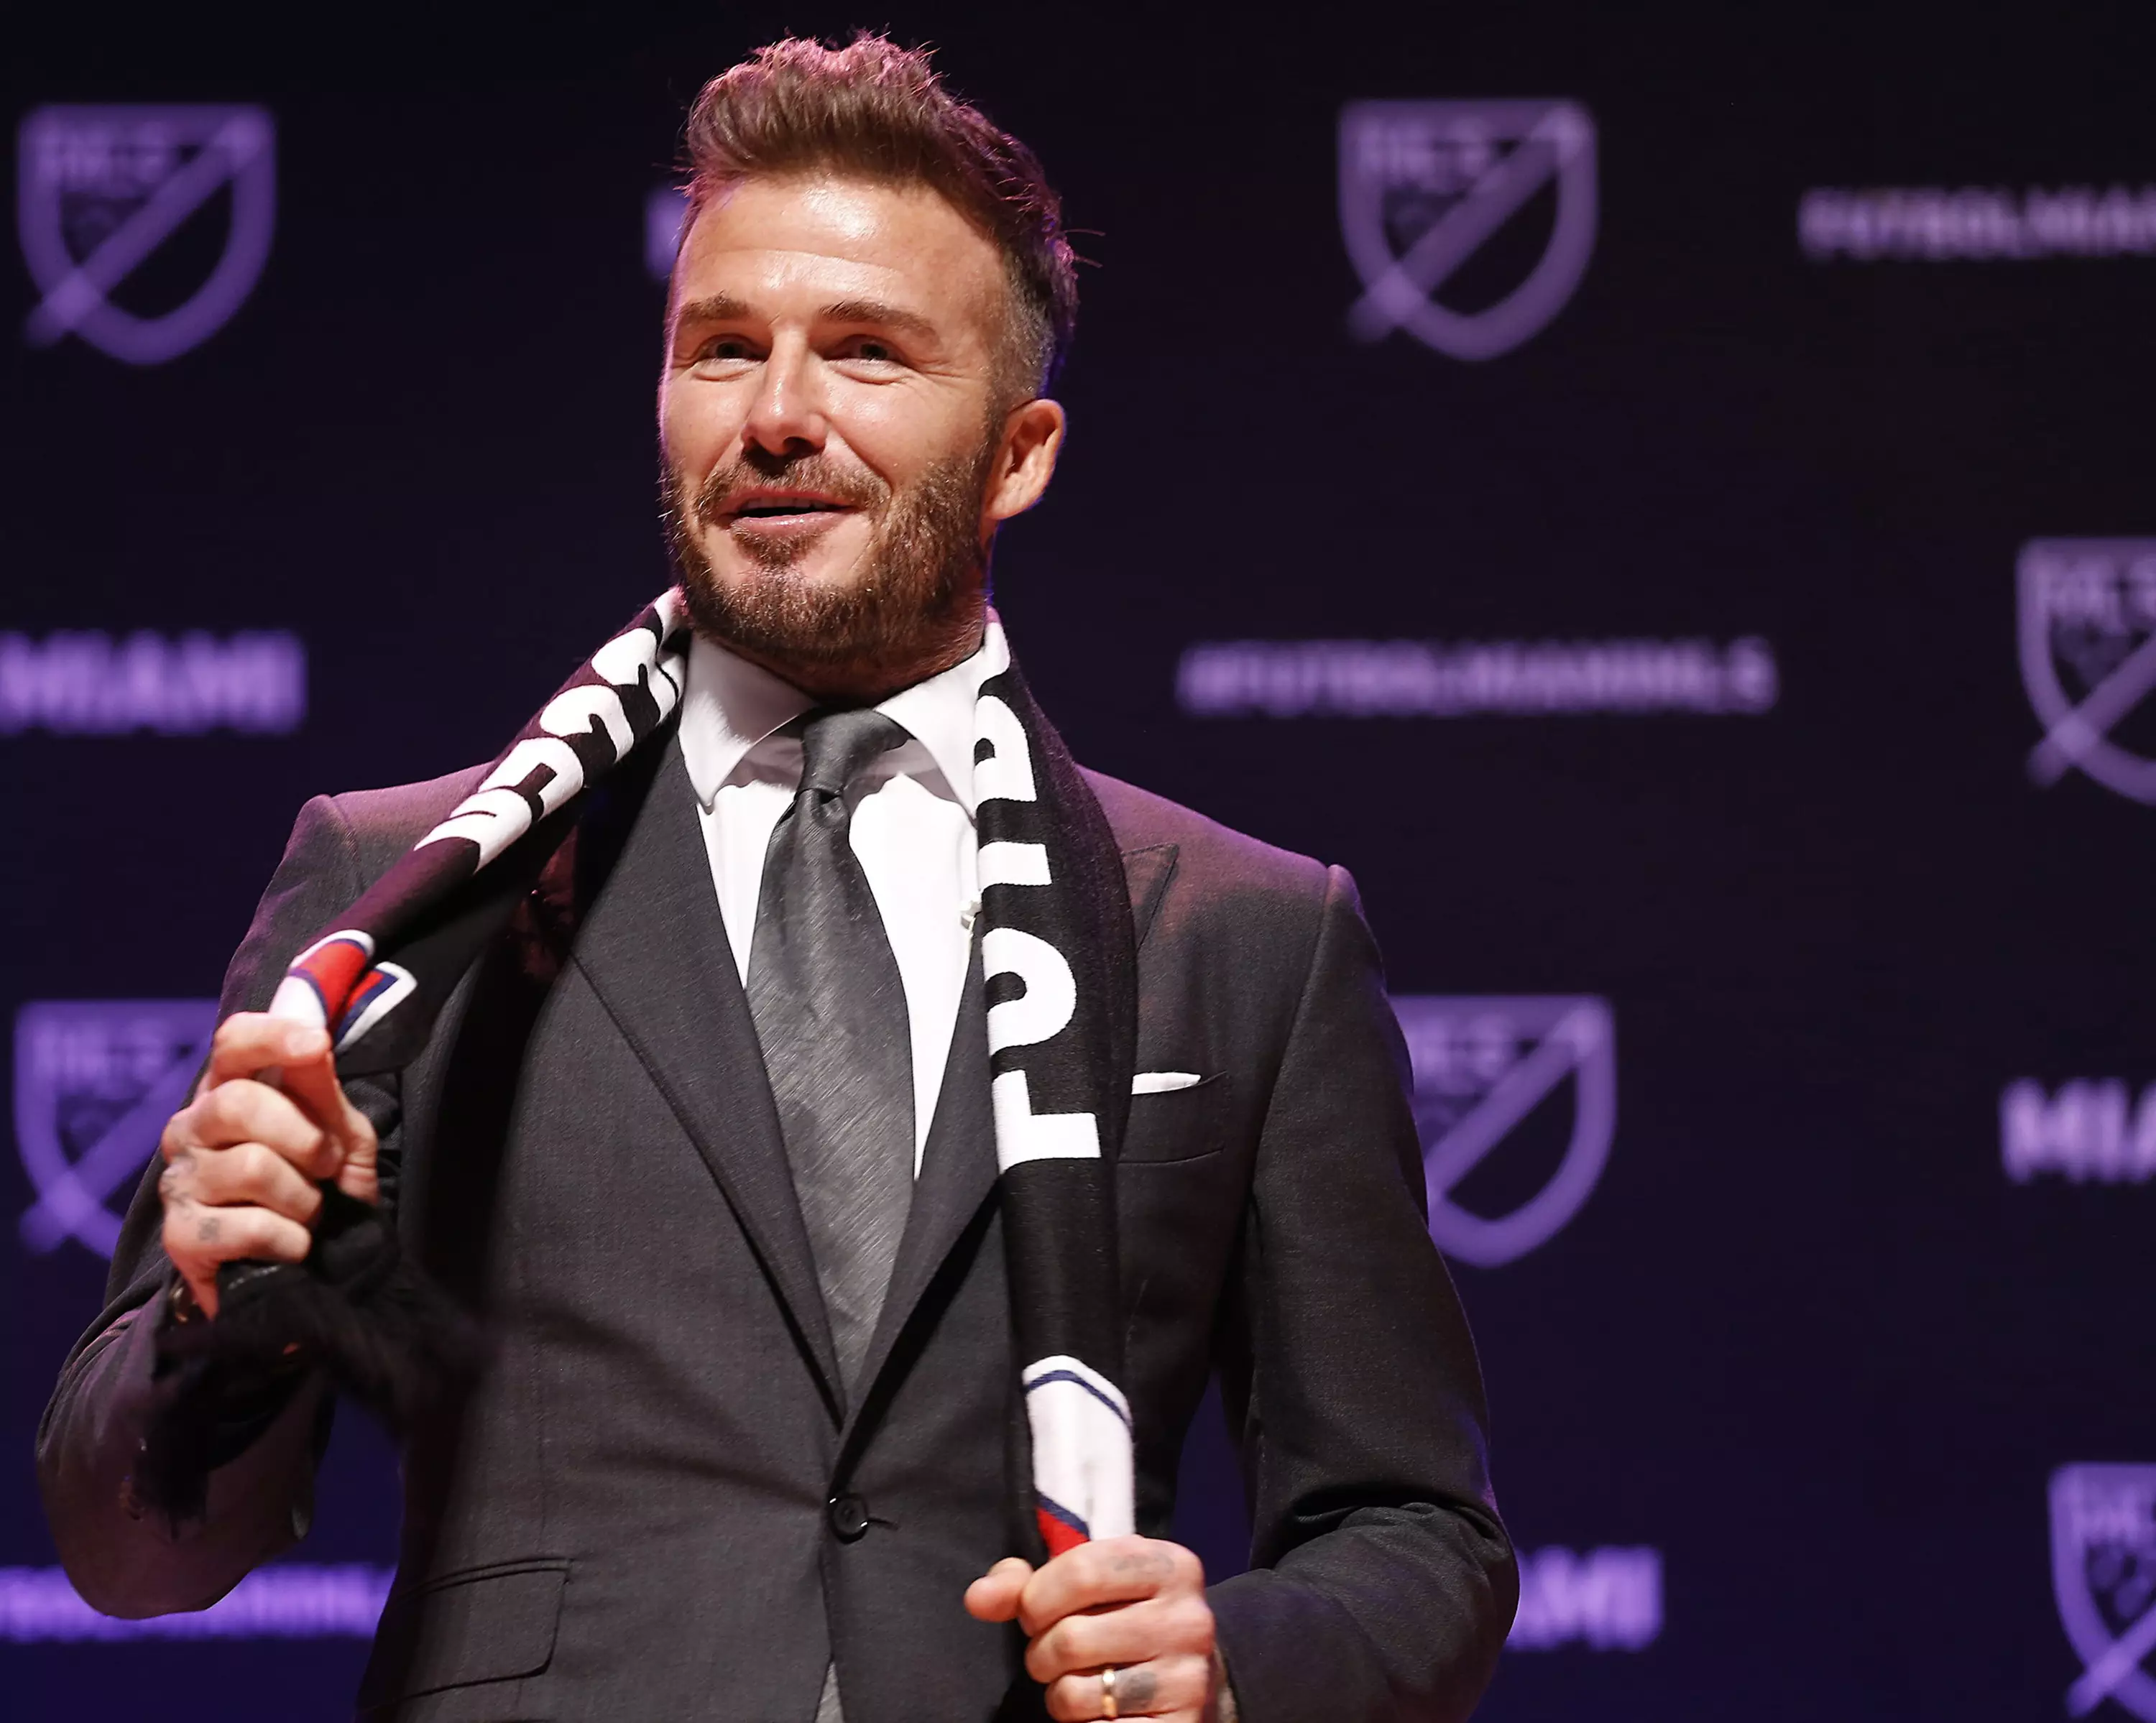 Becks' team will join MLS next year. Image: PA Images